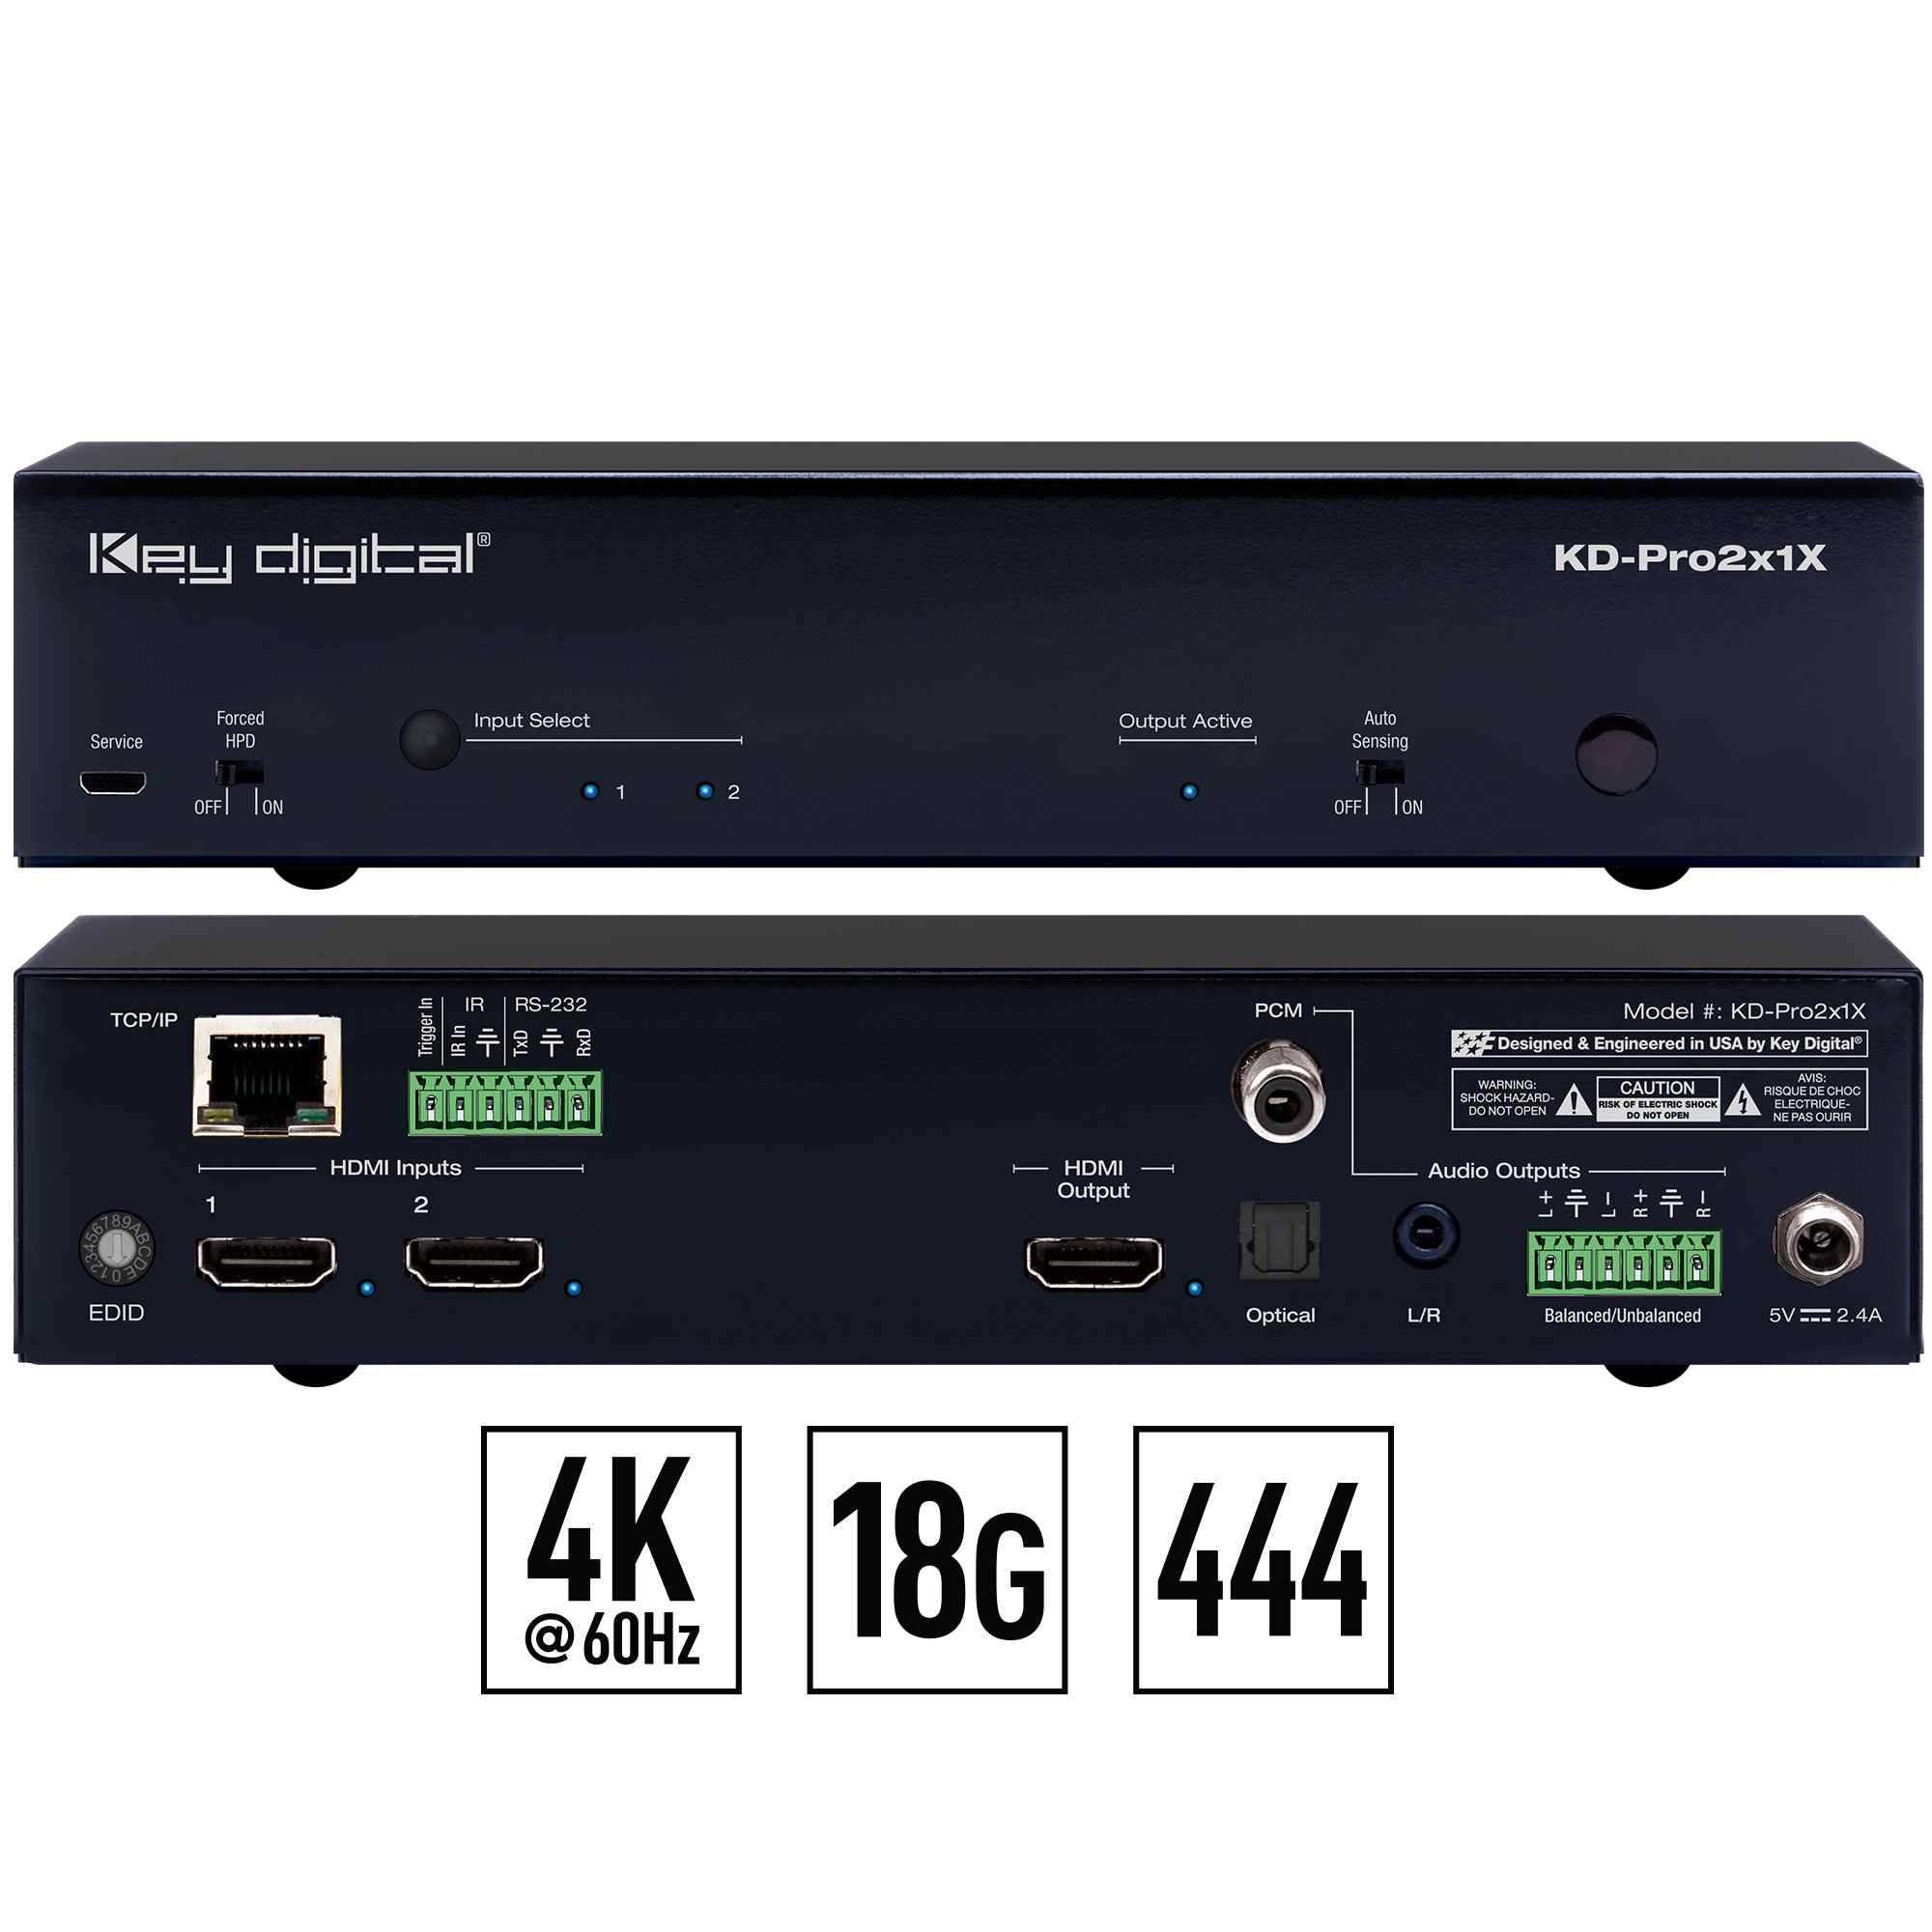 Digital hdmi auto switch front and rear View